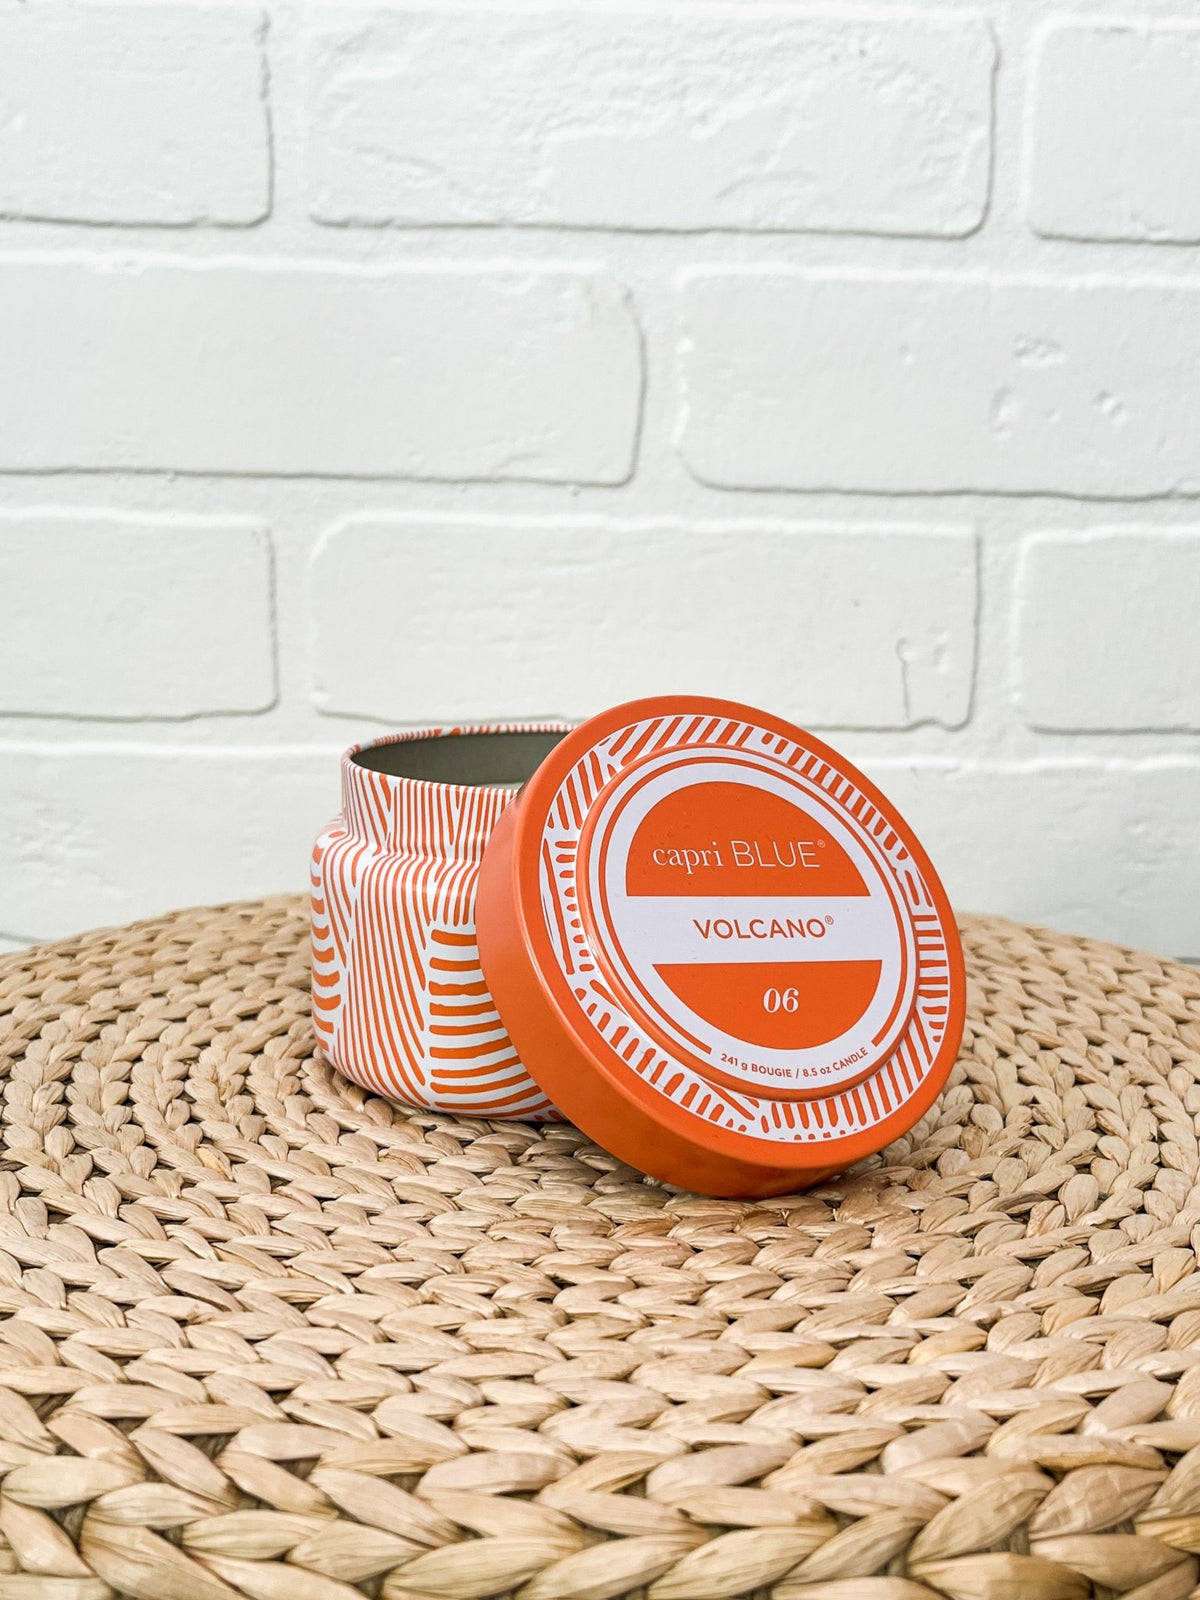 Capri blue tangerine print travel tin volcano - Trendy Candles and Scents at Lush Fashion Lounge Boutique in Oklahoma City